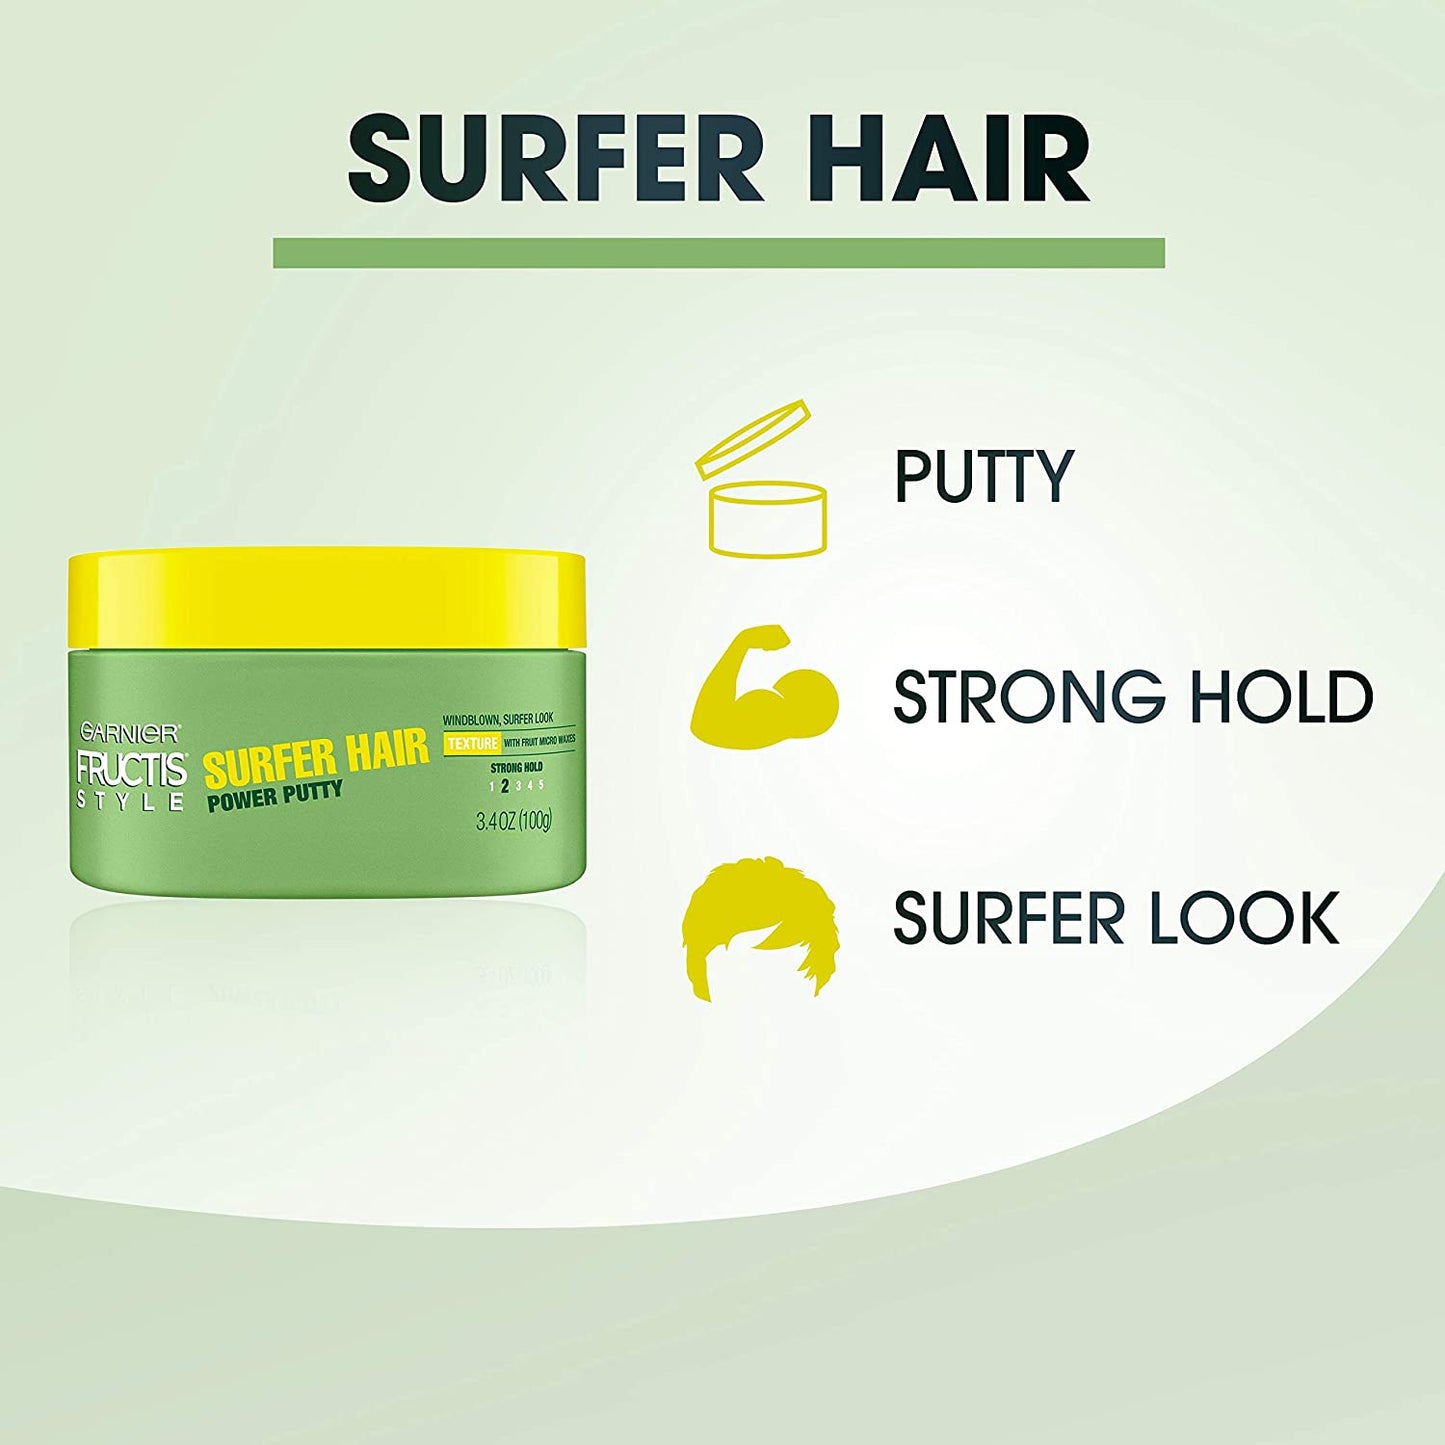 Garnier Fructis Style Surfer Hair Power Putty with Fruit Micro Waxes, 3.4 oz. / 100g